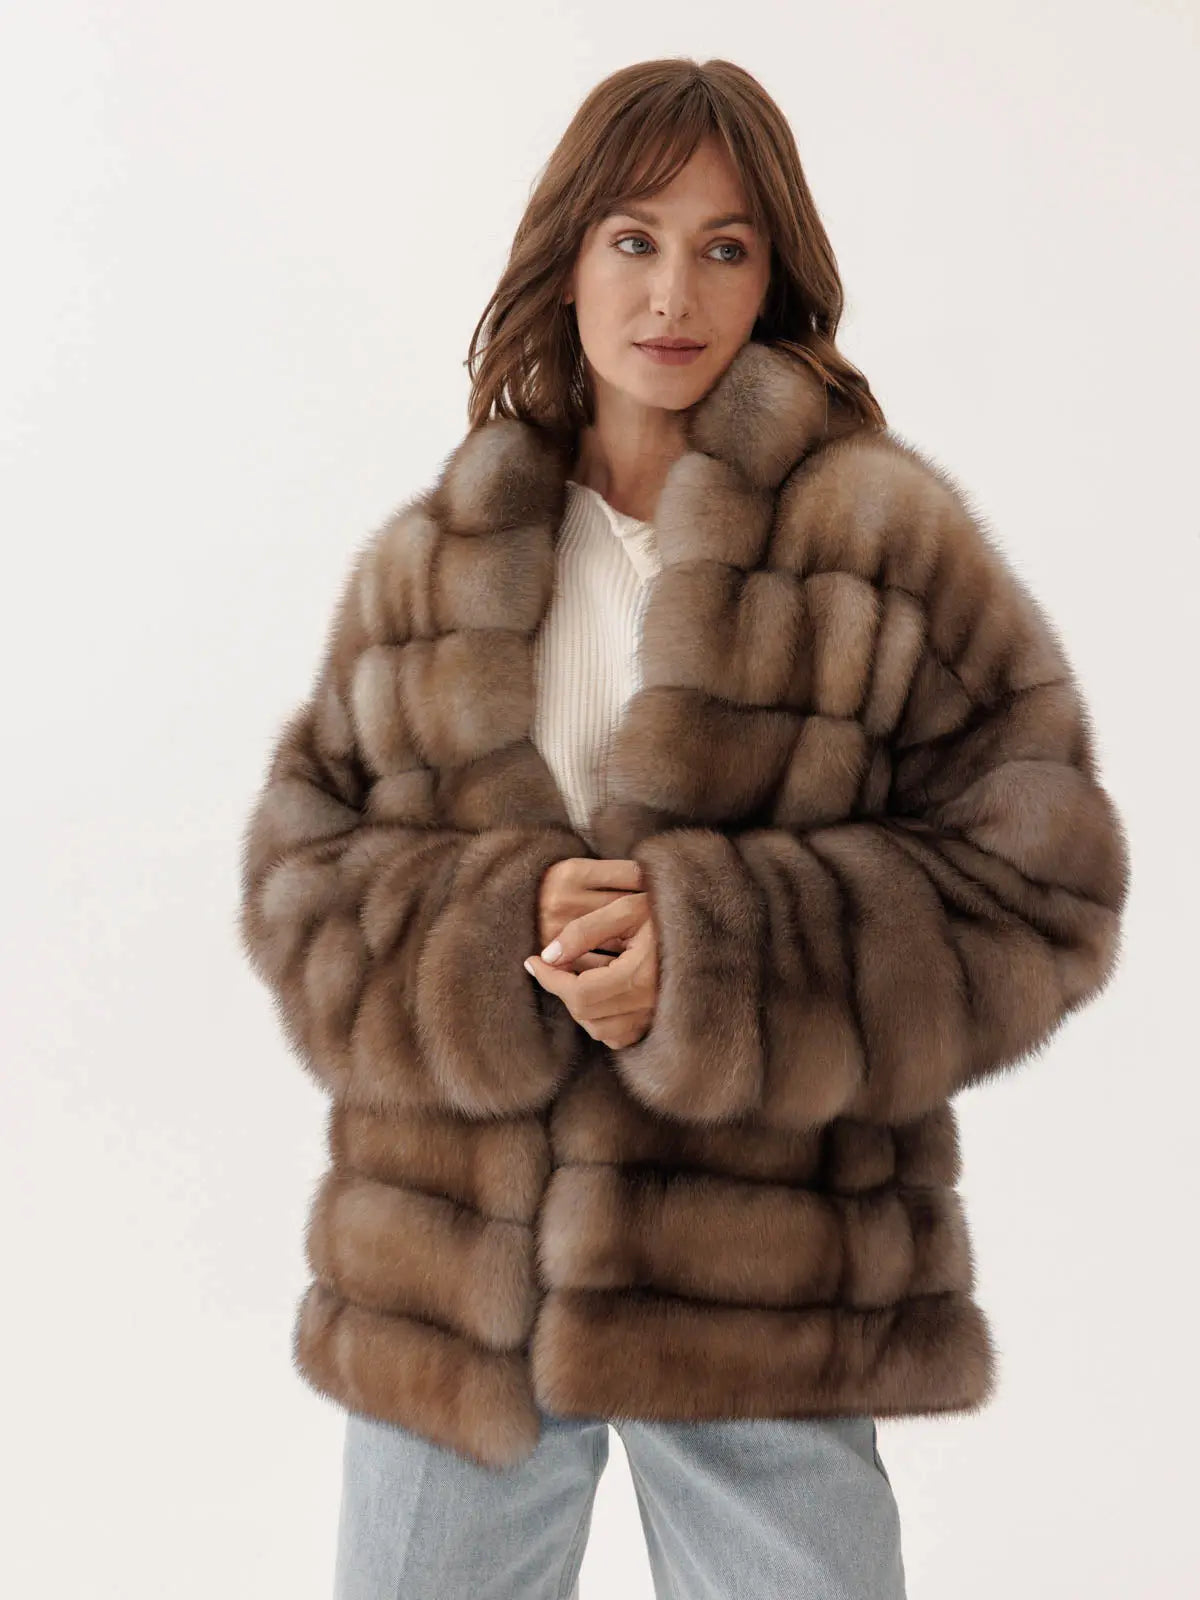 Marten coat with shawl collar for women